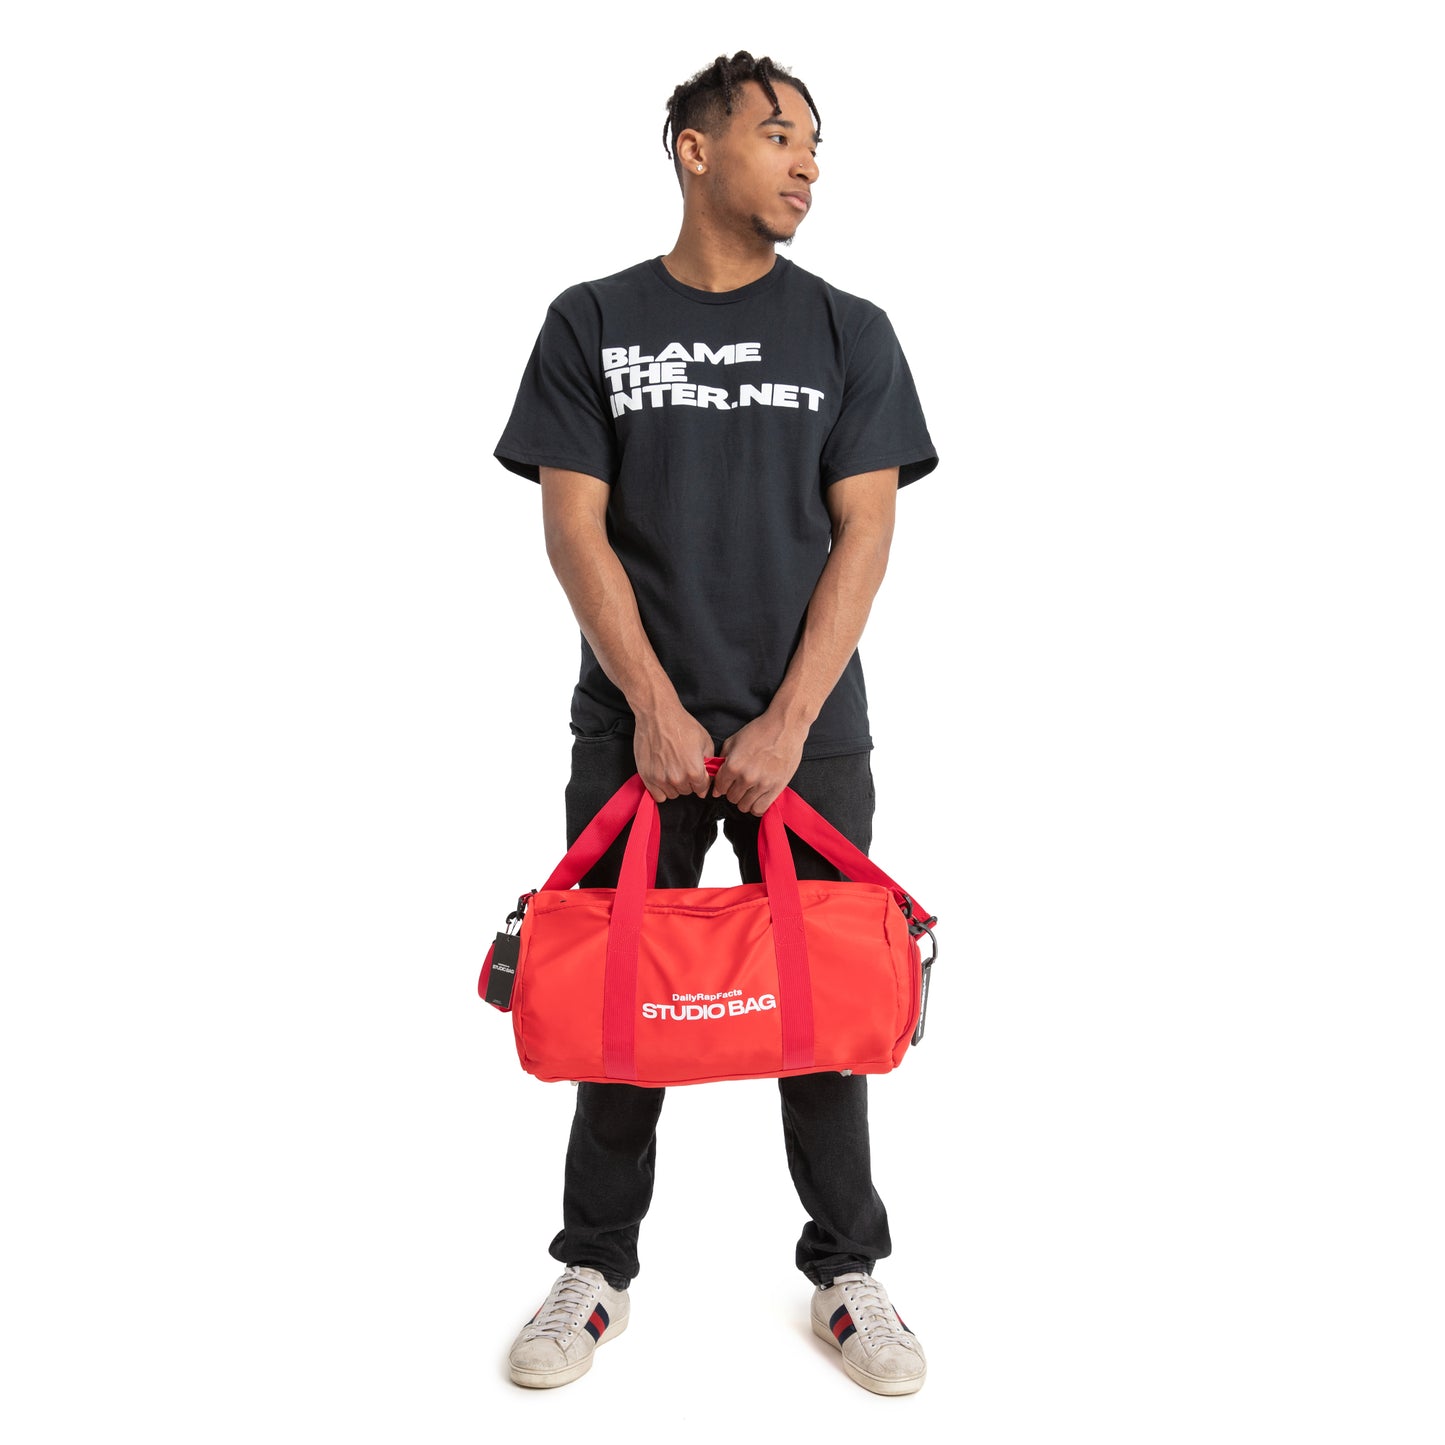 Wearing Blame the internet t-shirt and  Holding Studio Bag Red